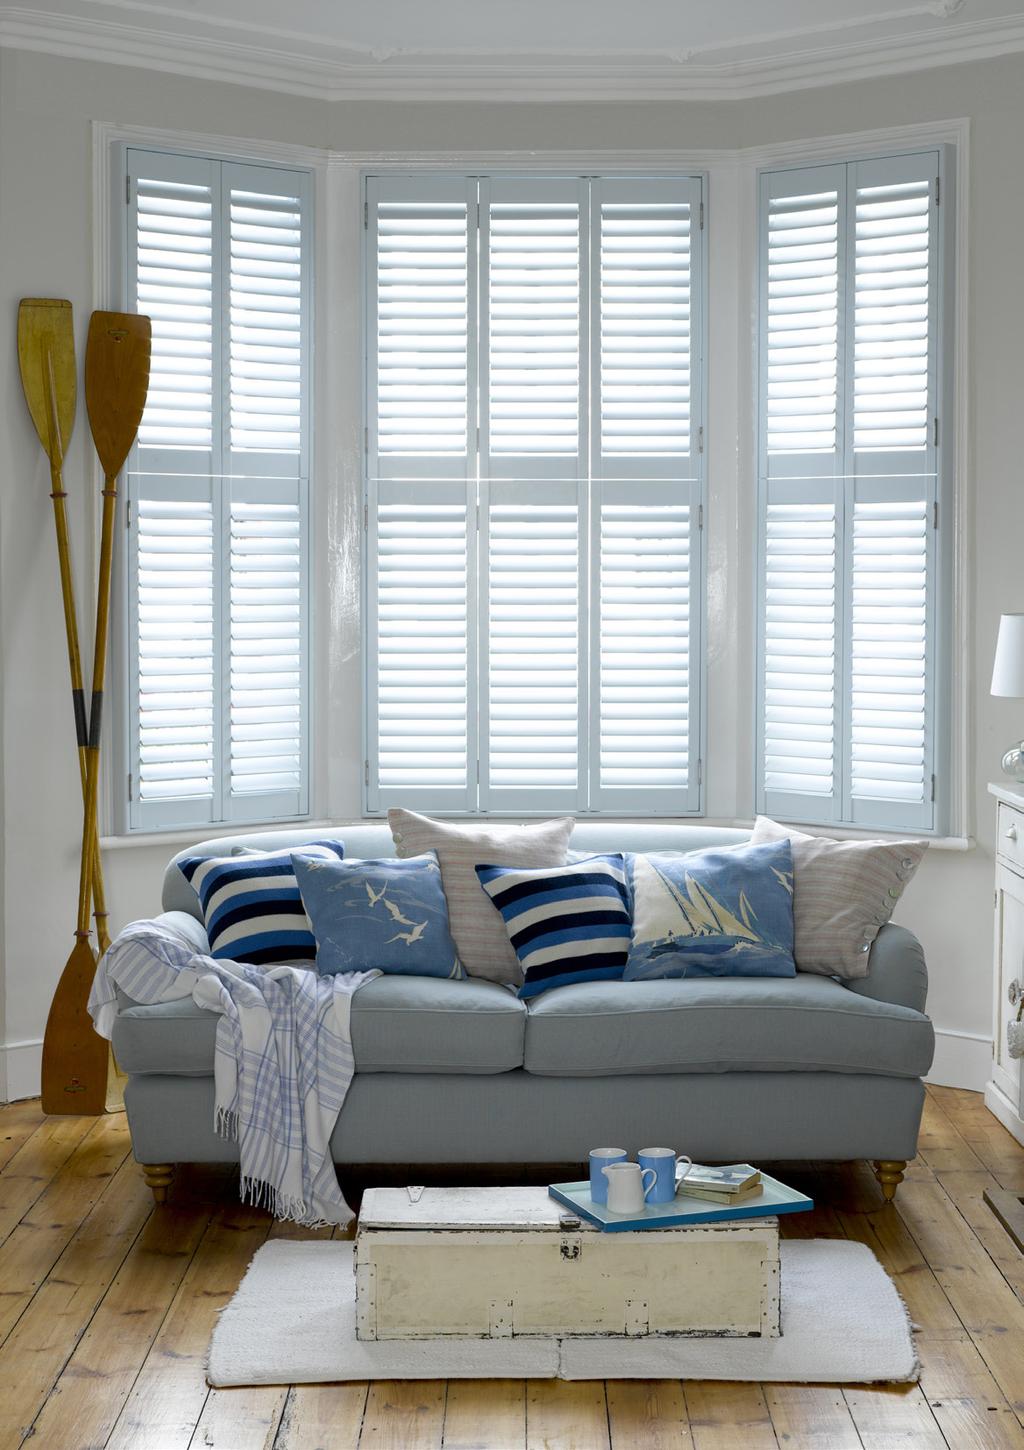 ABOUT US Cheap Shutters have been working hard online ever since 2009 and have helped hundreds of customers to find quality interior window shutters at competitor-beating rates.